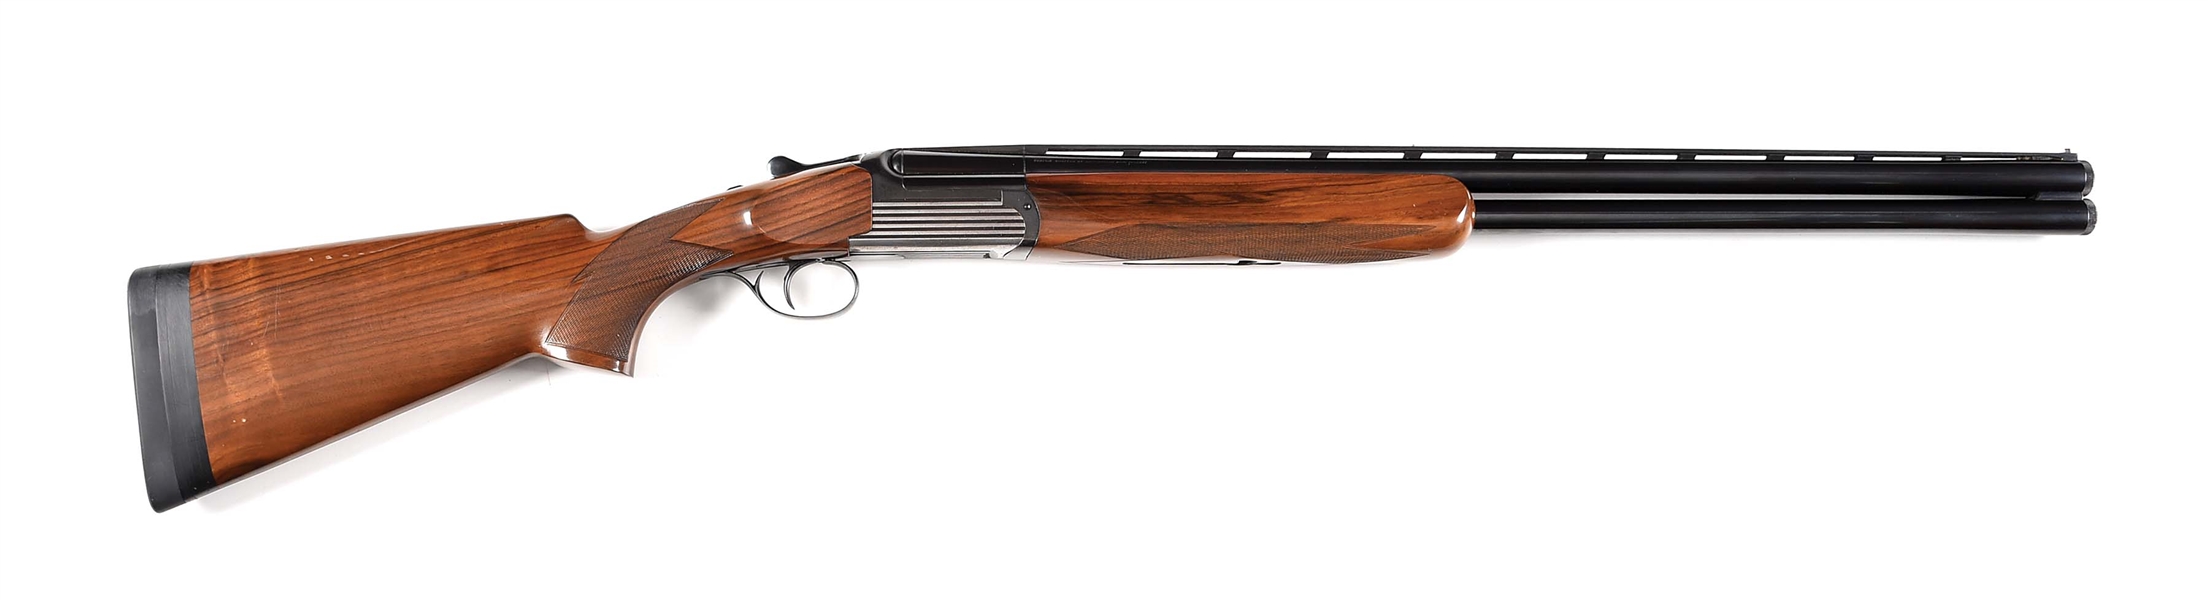 (M) ITHACA GUN CO. MODEL MT-6 OVER UNDER SHOTGUN MADE BY PERAZZI WITH BRILEY TUBES AND CASE.